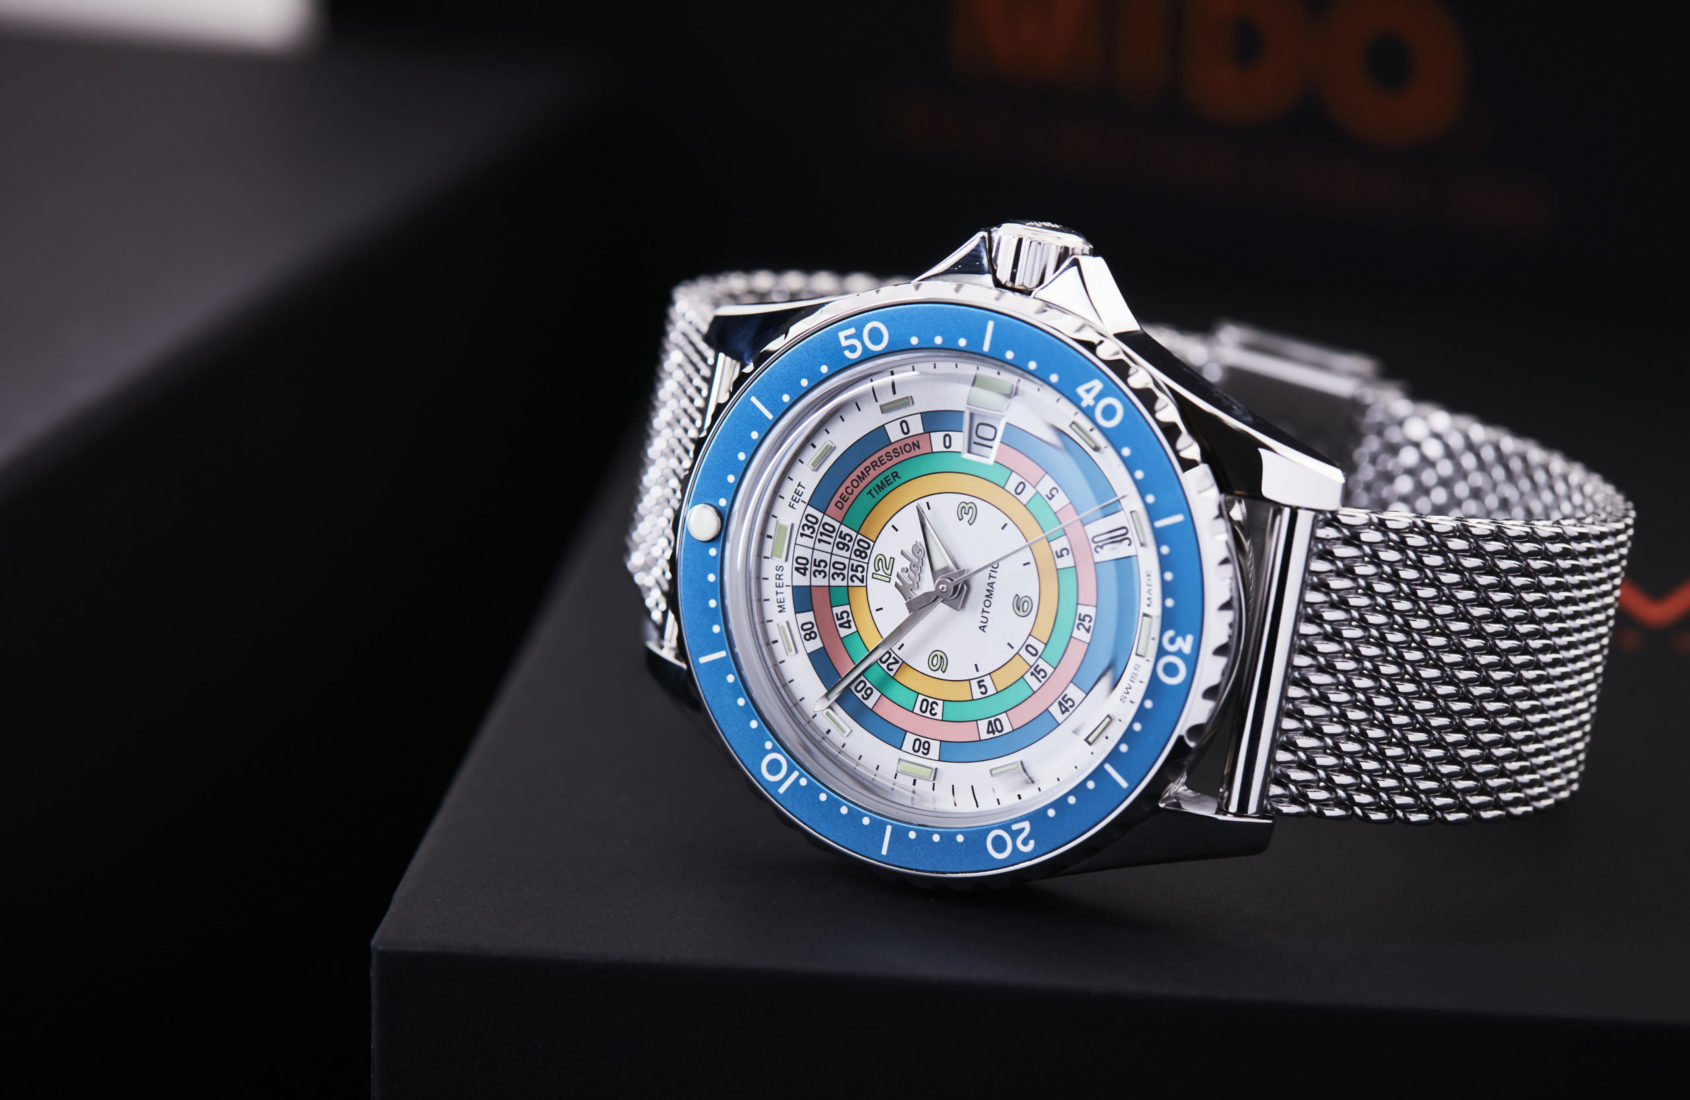 VIDEO: The Mido Decompression Timer 1961 Limited Edition with a fresh silver dial and turquoise bezel